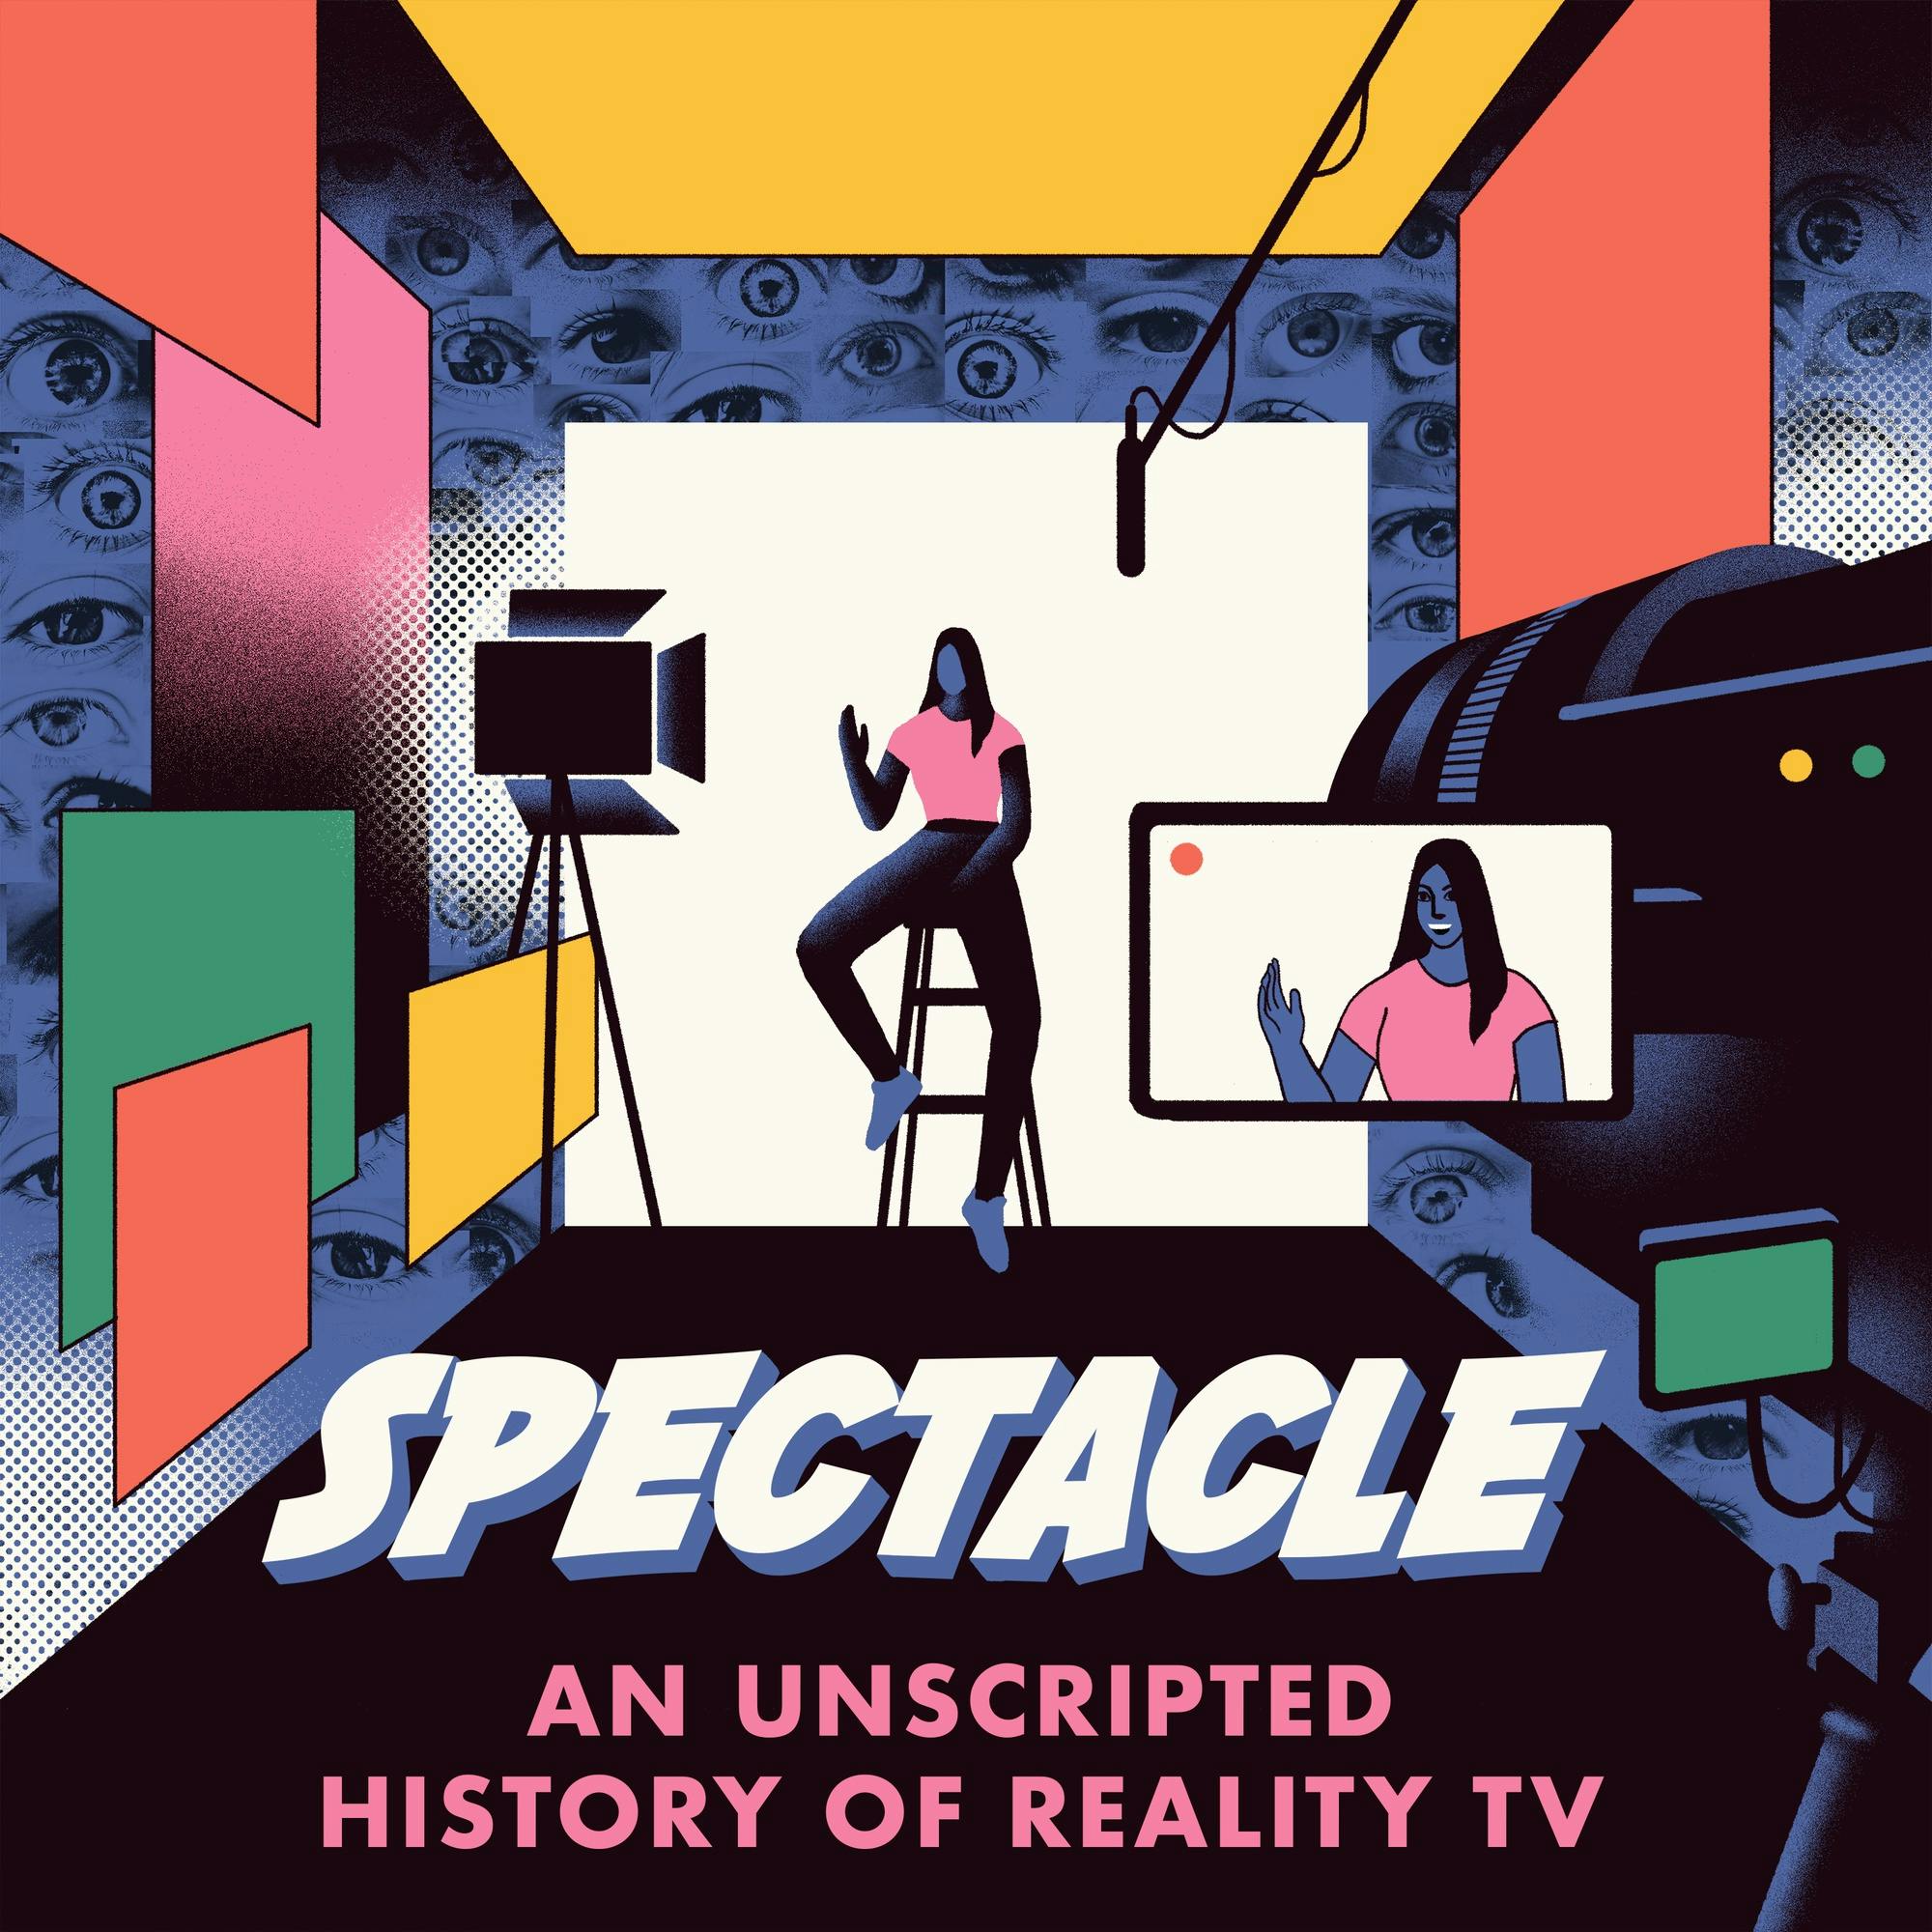 Spectacle: An Unscripted History of Reality TV Trailer